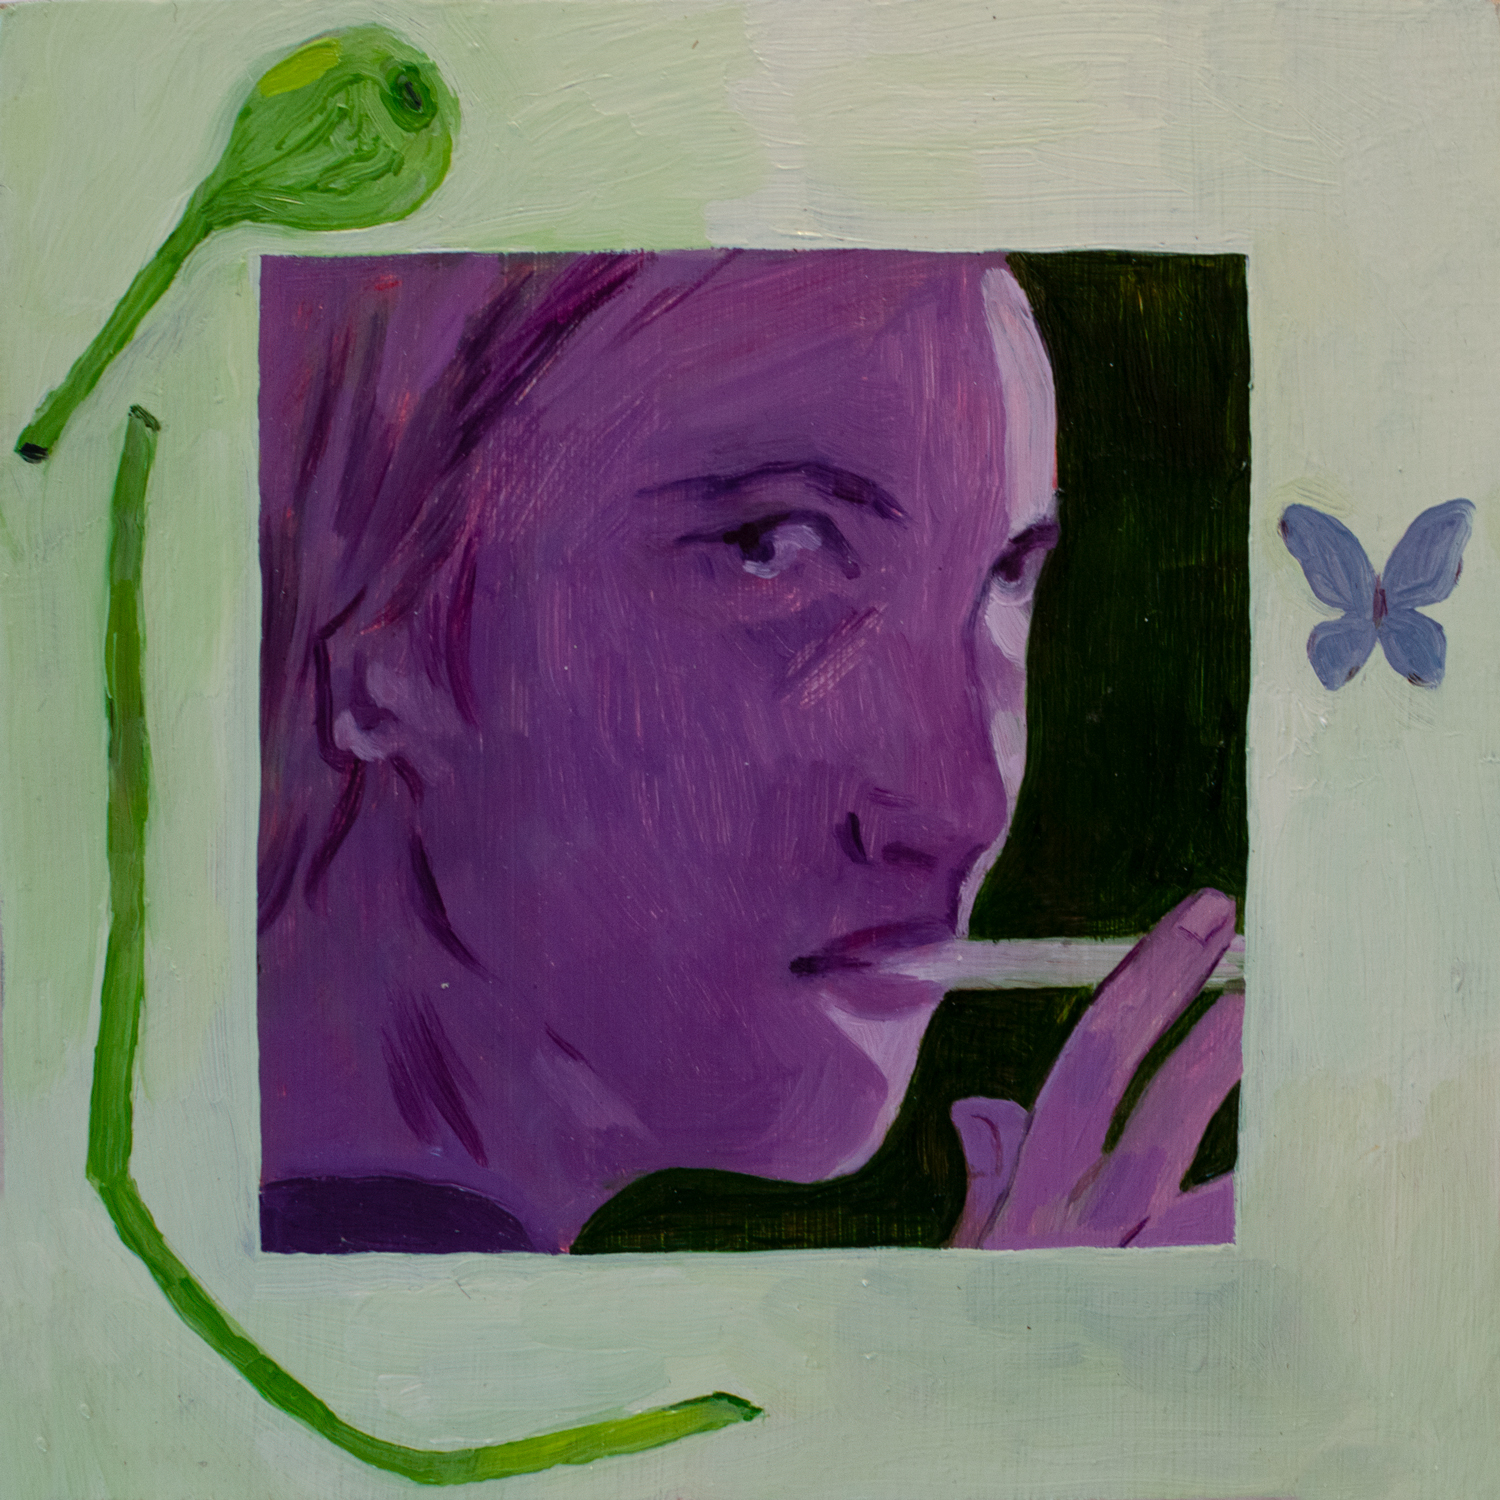 Portrait of a face caught in nighttime light, smoking a cigarette. A broken flower pod and a butterfly sticker surround.